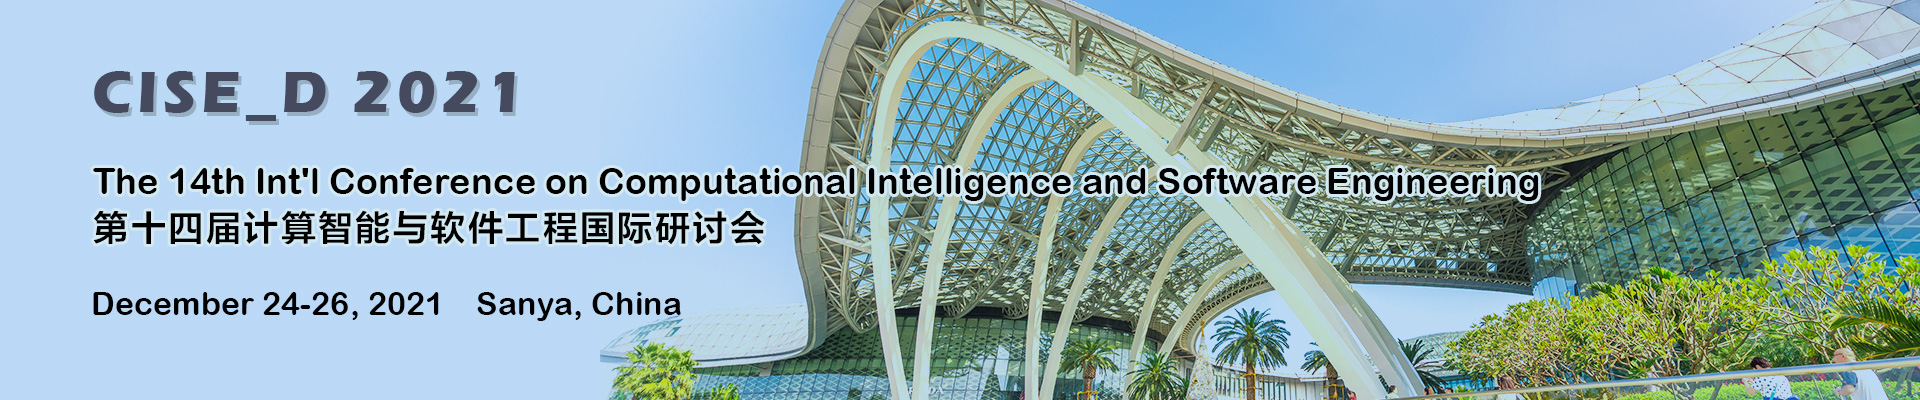 The 14th Int'l Conference on Computational Intelligence and Software Engineering (CISE_D 2021), Sanya, Hainan, China